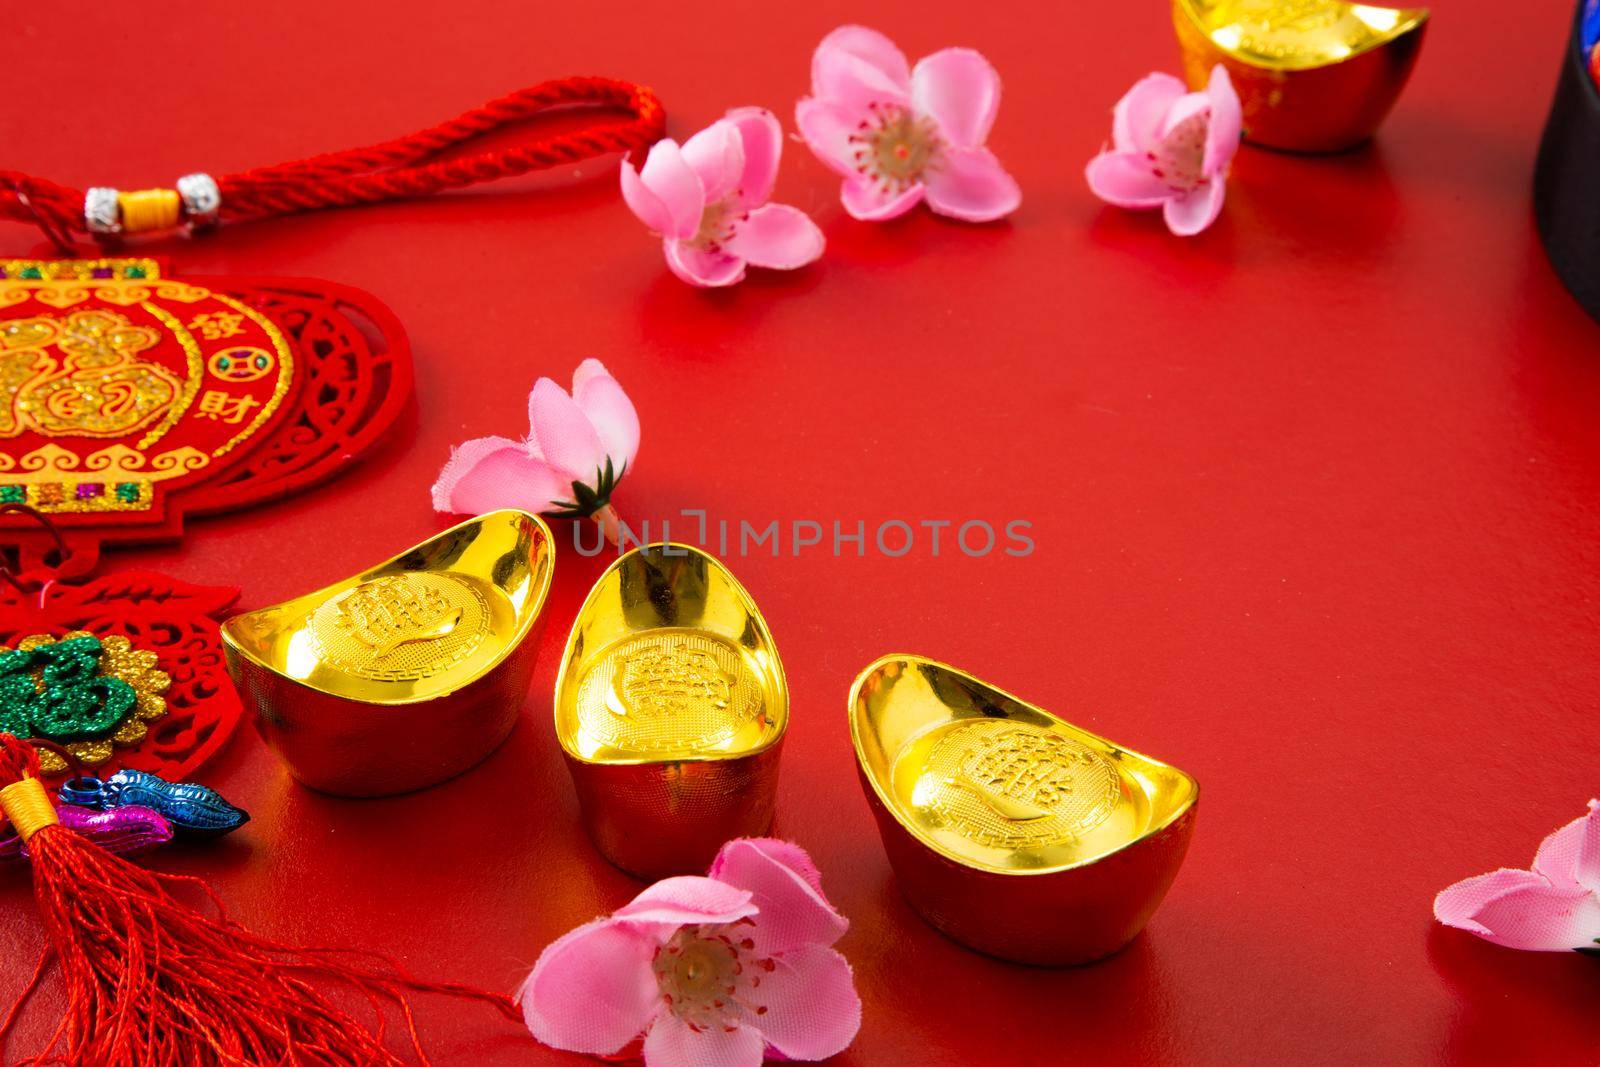 Translation of text appear in image: Prosperity and Spring. Flat lay Chinese new year